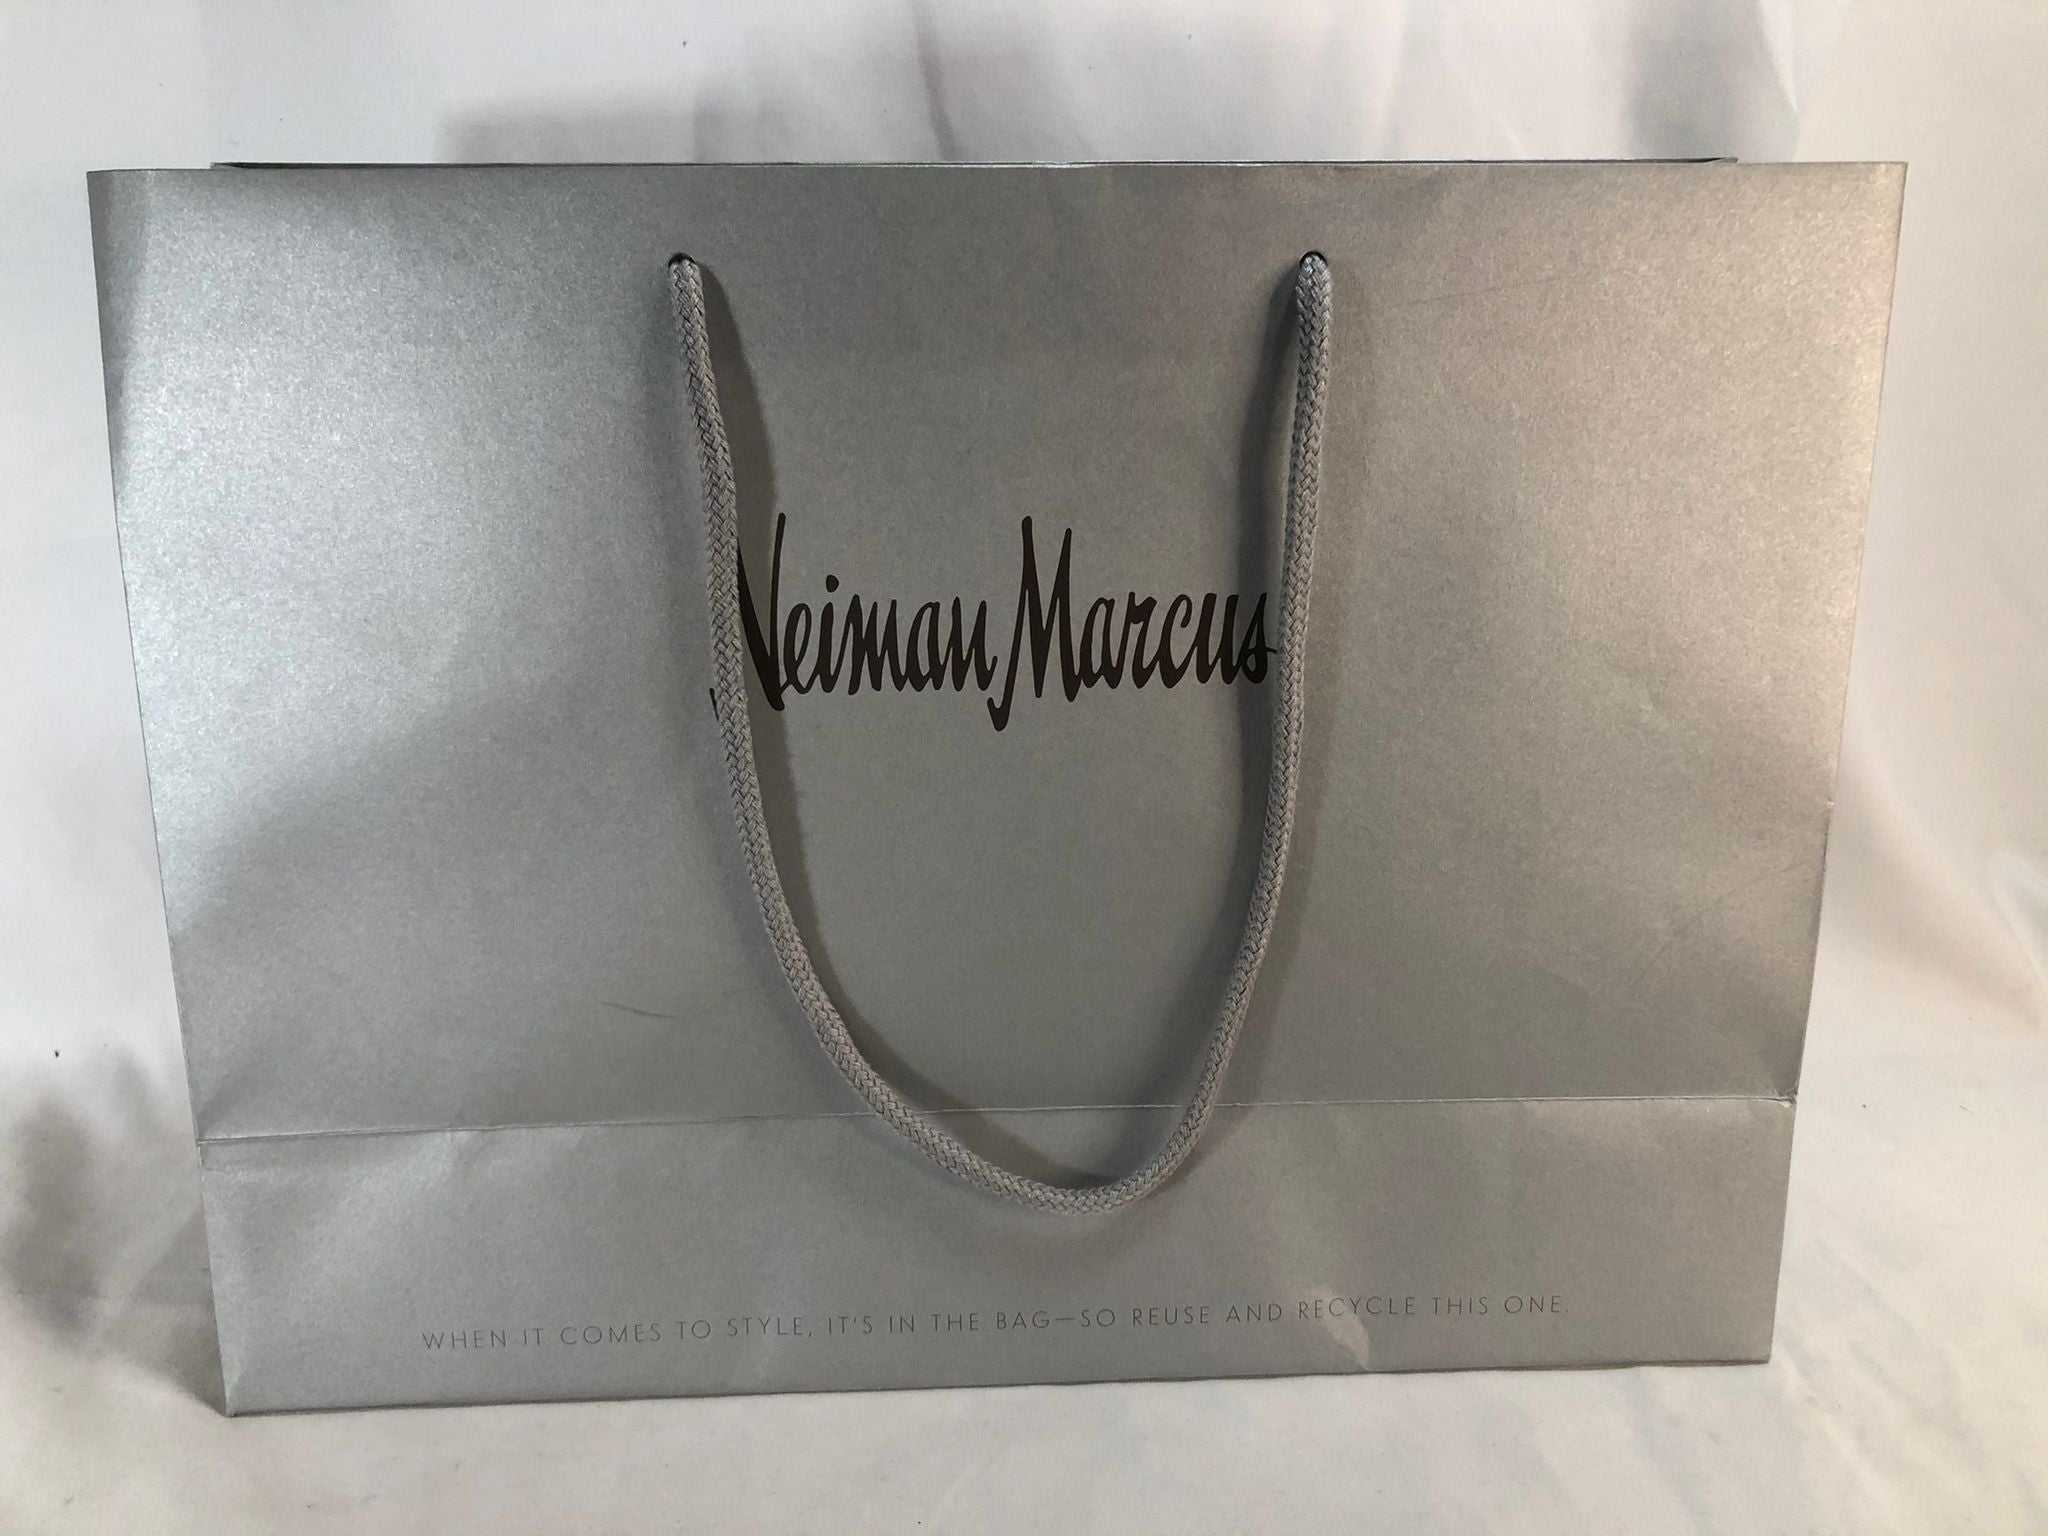 New Neiman Marcus 16 x 12 x 6 Silver Paper Shopping Bag Authentic